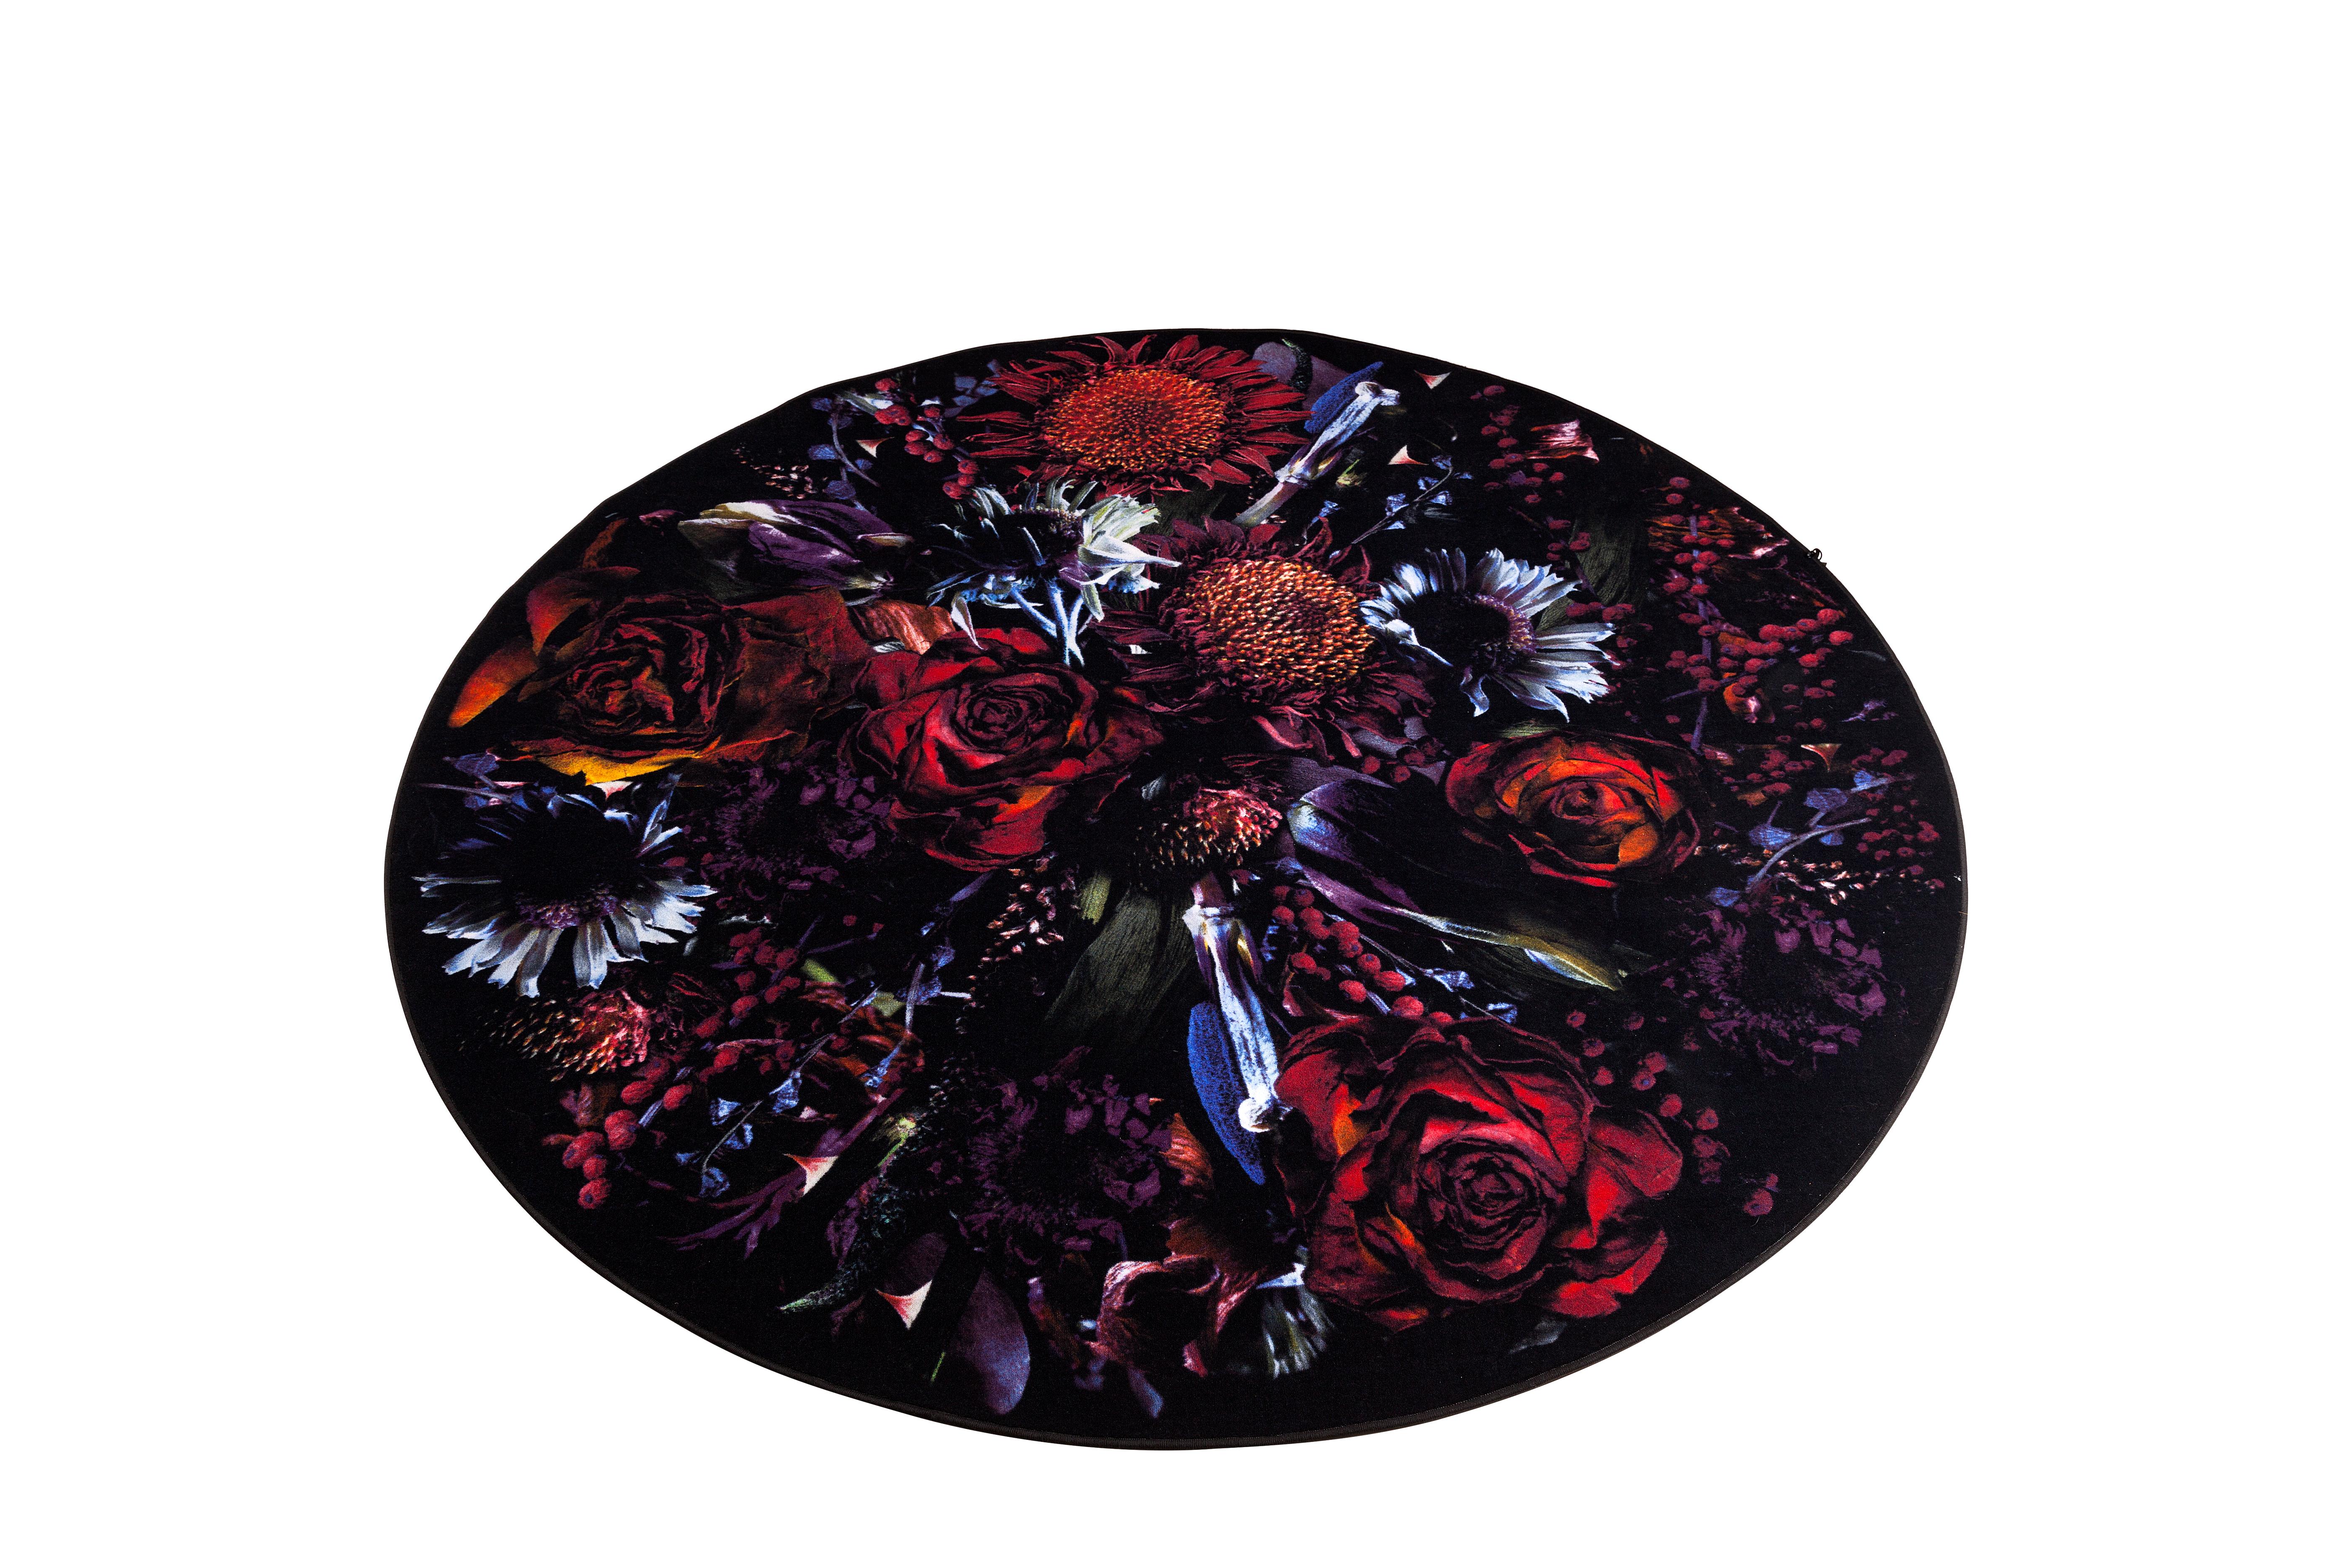 Moooi small fool’s paradise round rug in low pile polyamide.

Marcel Wanders studio is a leading product and interior design studio located in the creative capital of Amsterdam. The studio has over 1,900 + iconic product and interior design